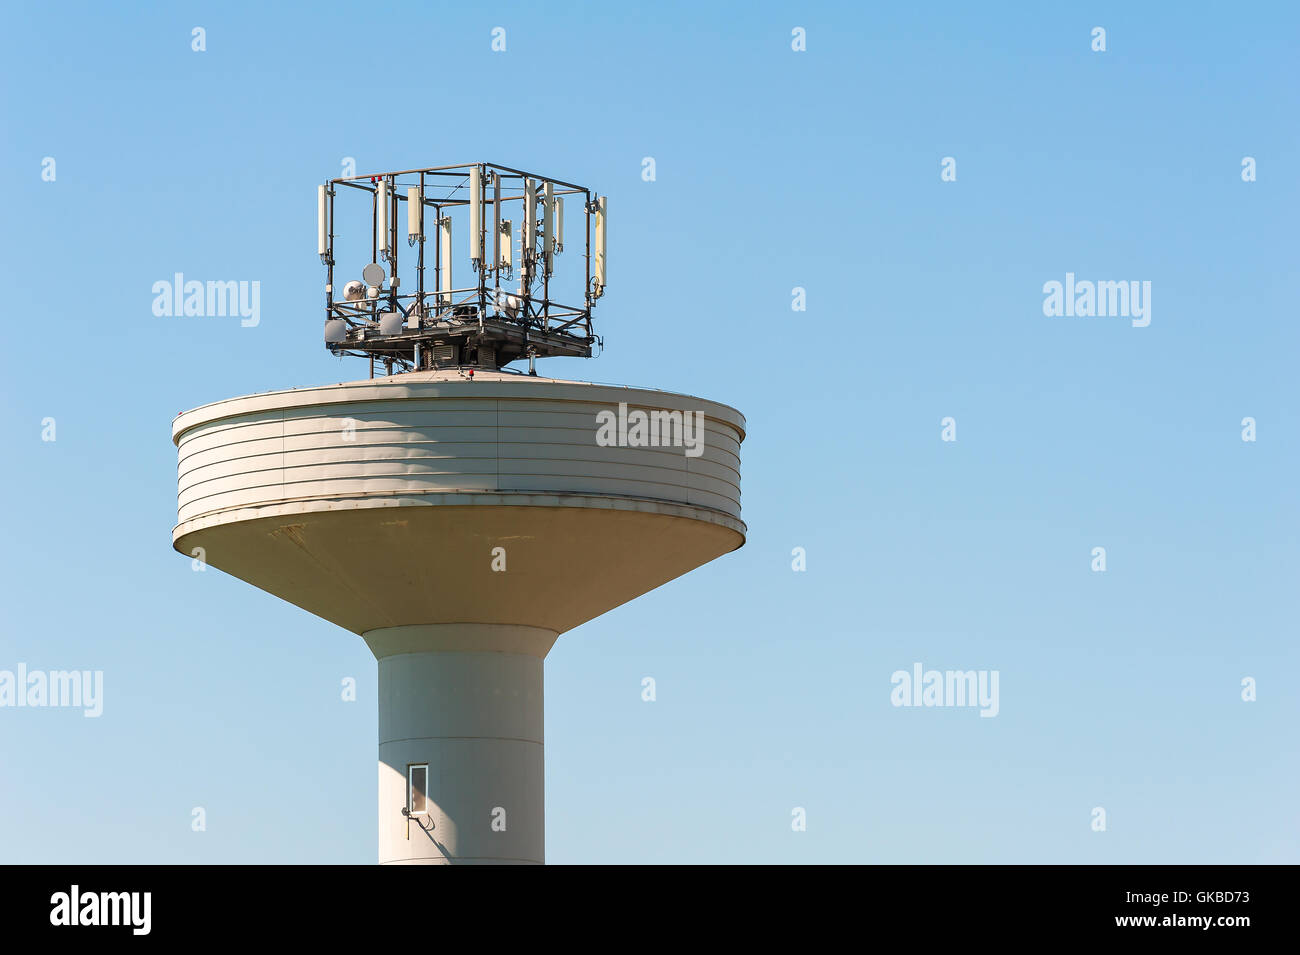 Water tank tower surmounted with a telephone repeater antennas against blue sky .Copy space Stock Photo